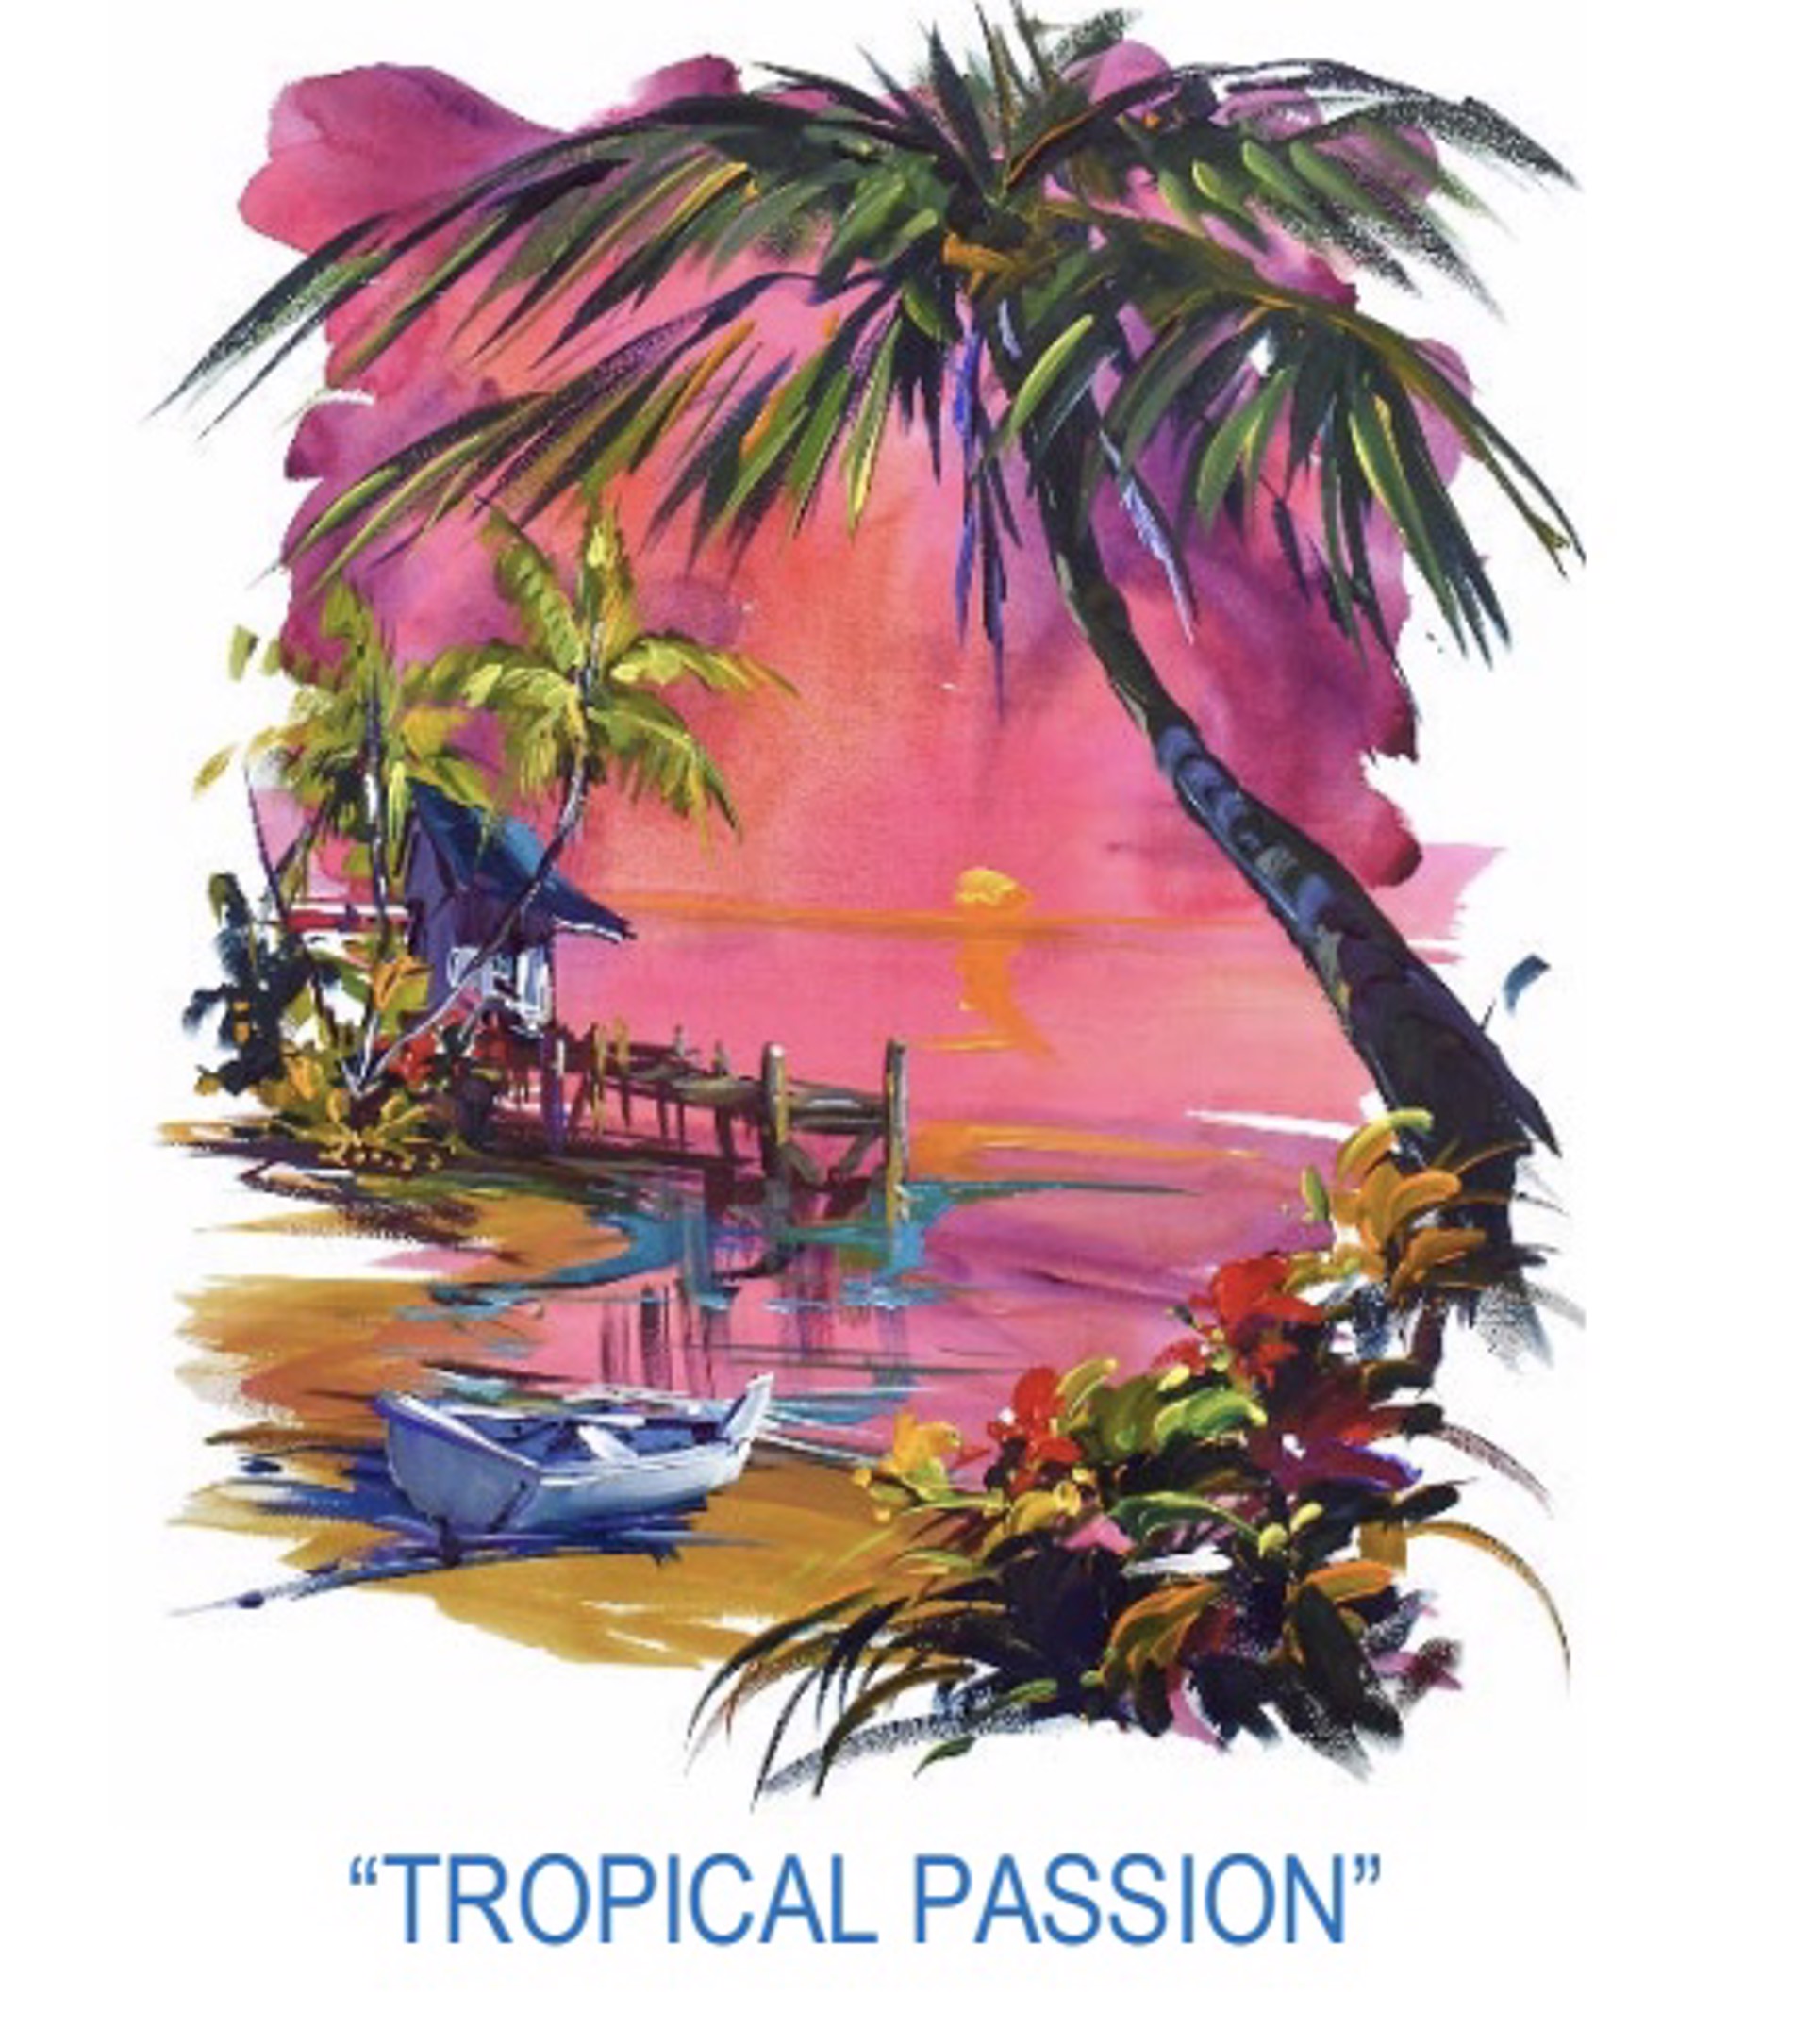 Tropical Passion by Steve Barton